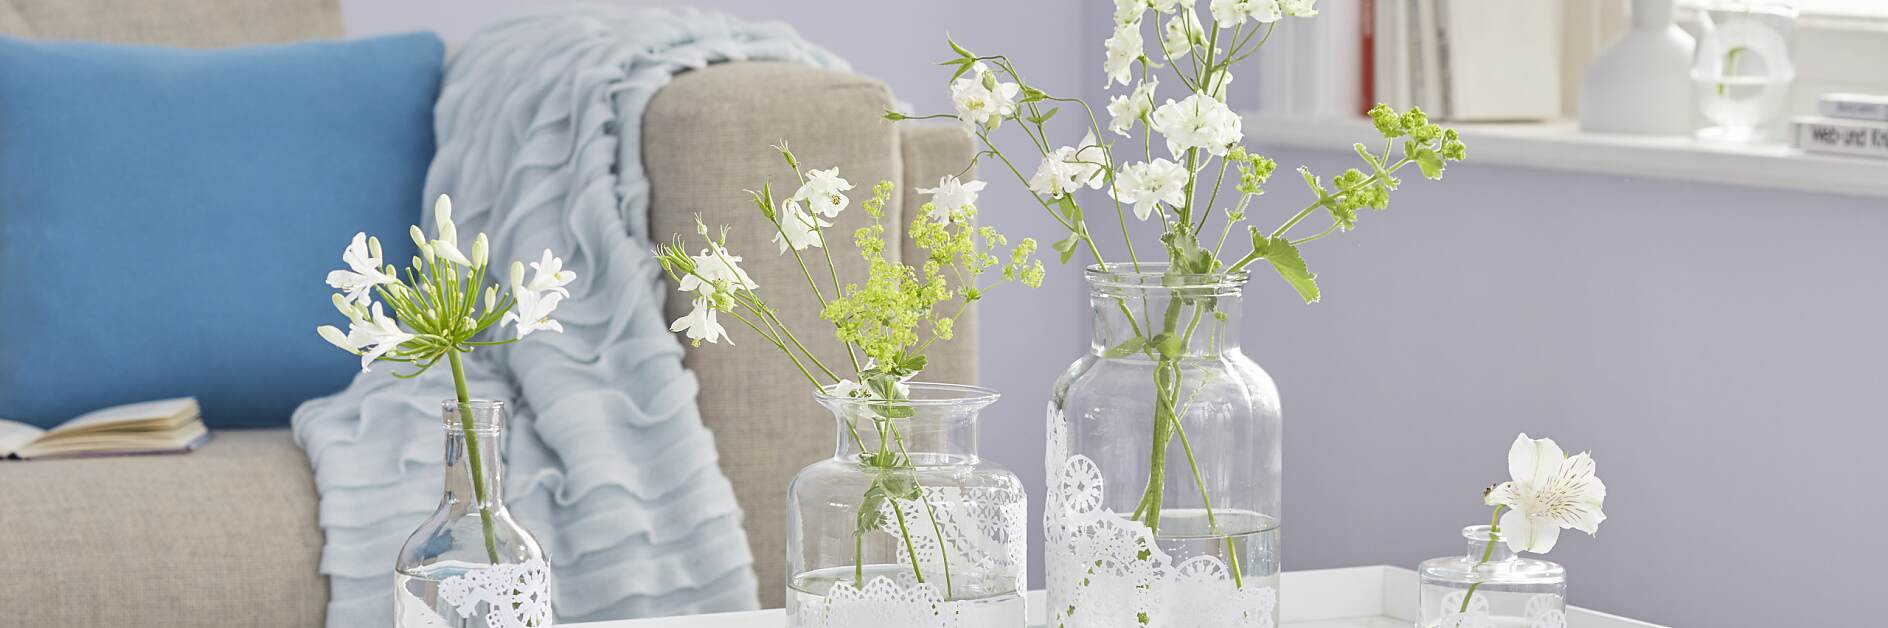 Create your own DIY lace vases!